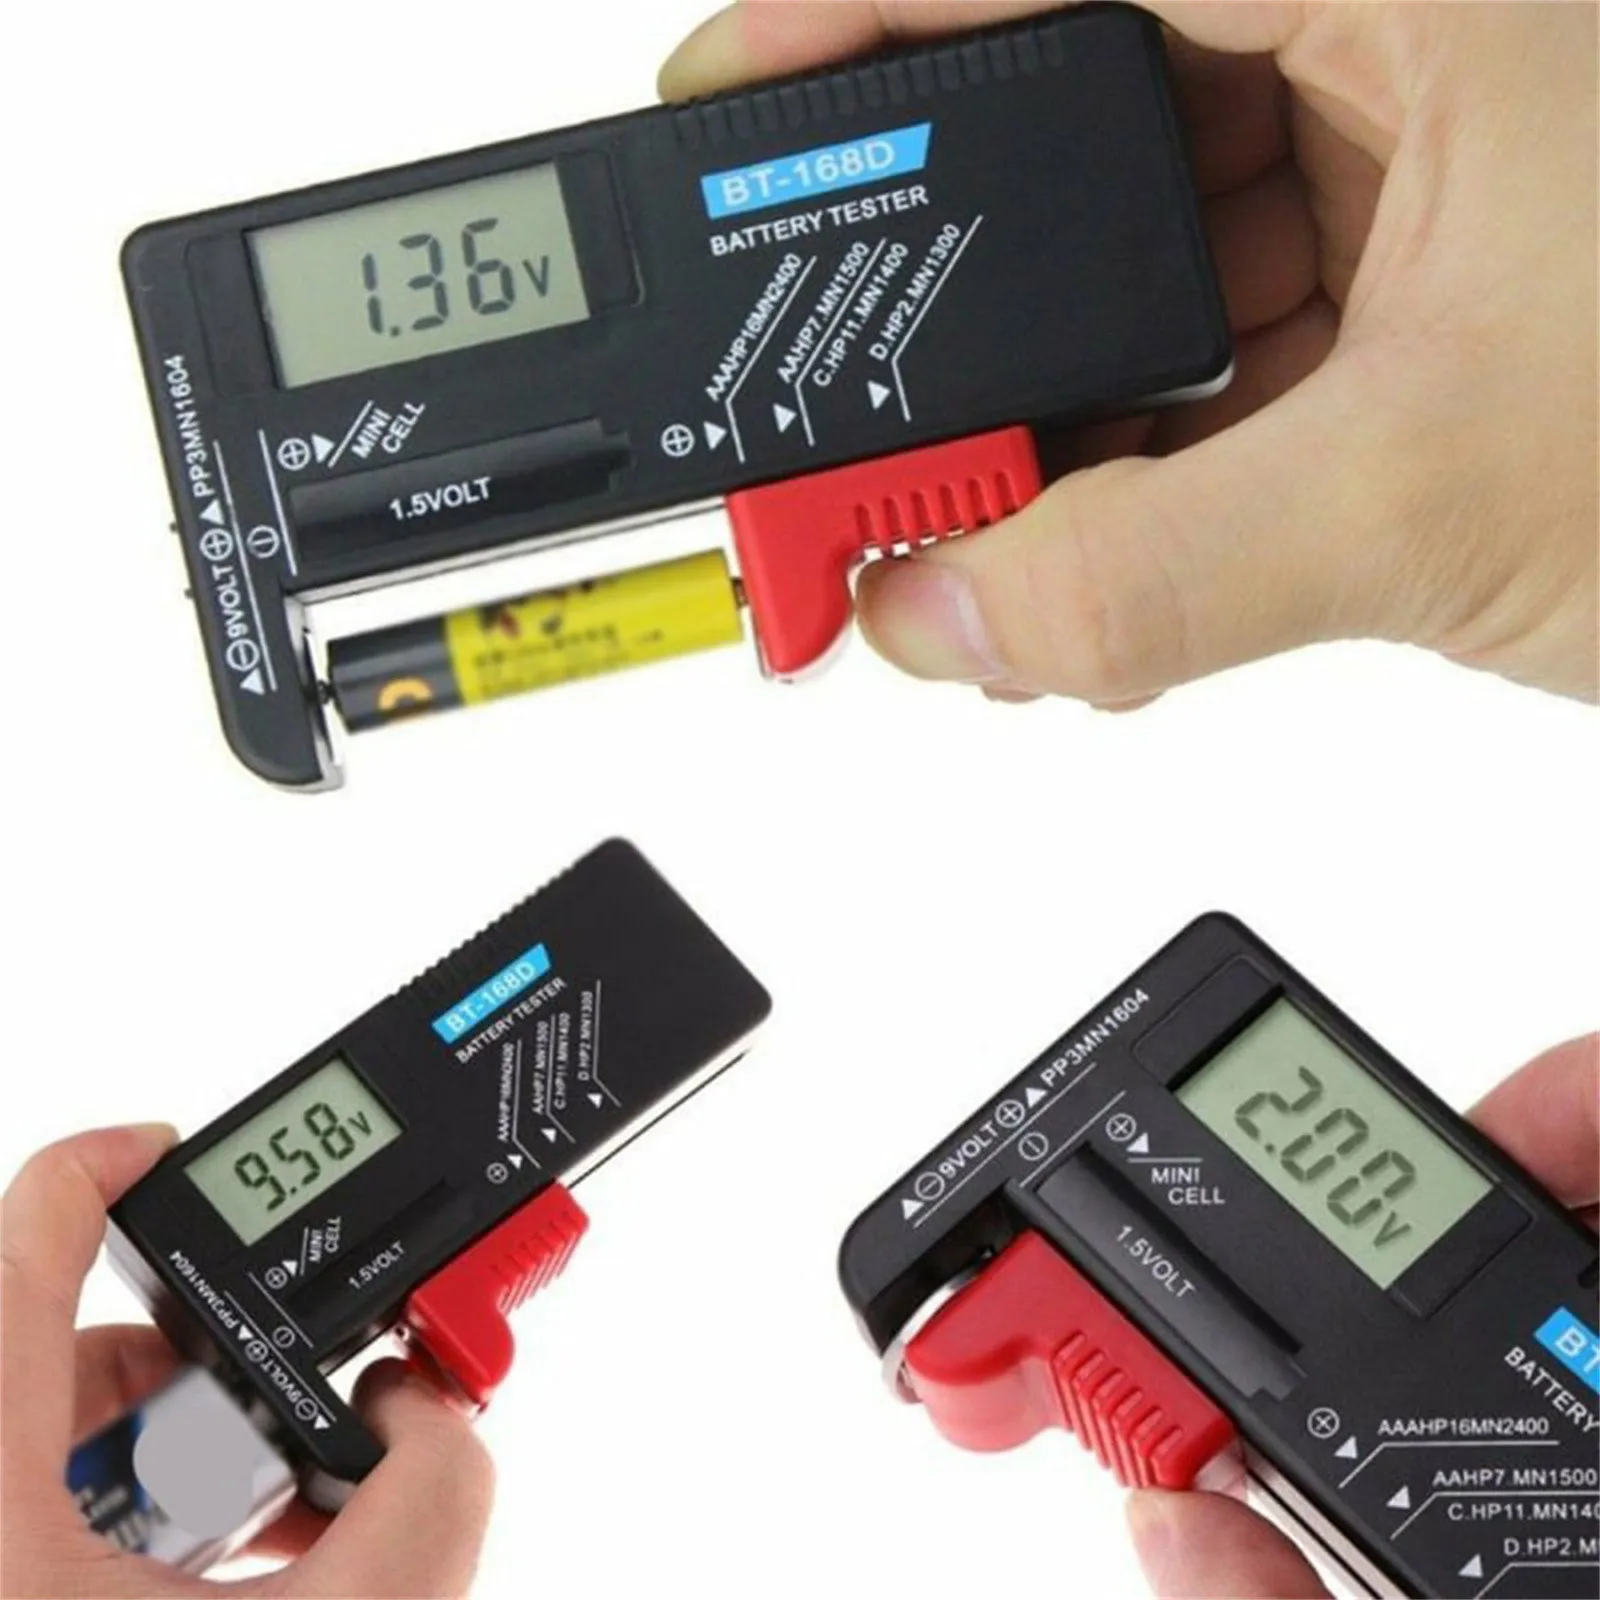 

Bt-168 Pro Bt-168d Bt-168 Digital Battery Tester Lcd Display C D N Aa Aaa 9v 1.5v Button Cell Battery Capacity Check Detector